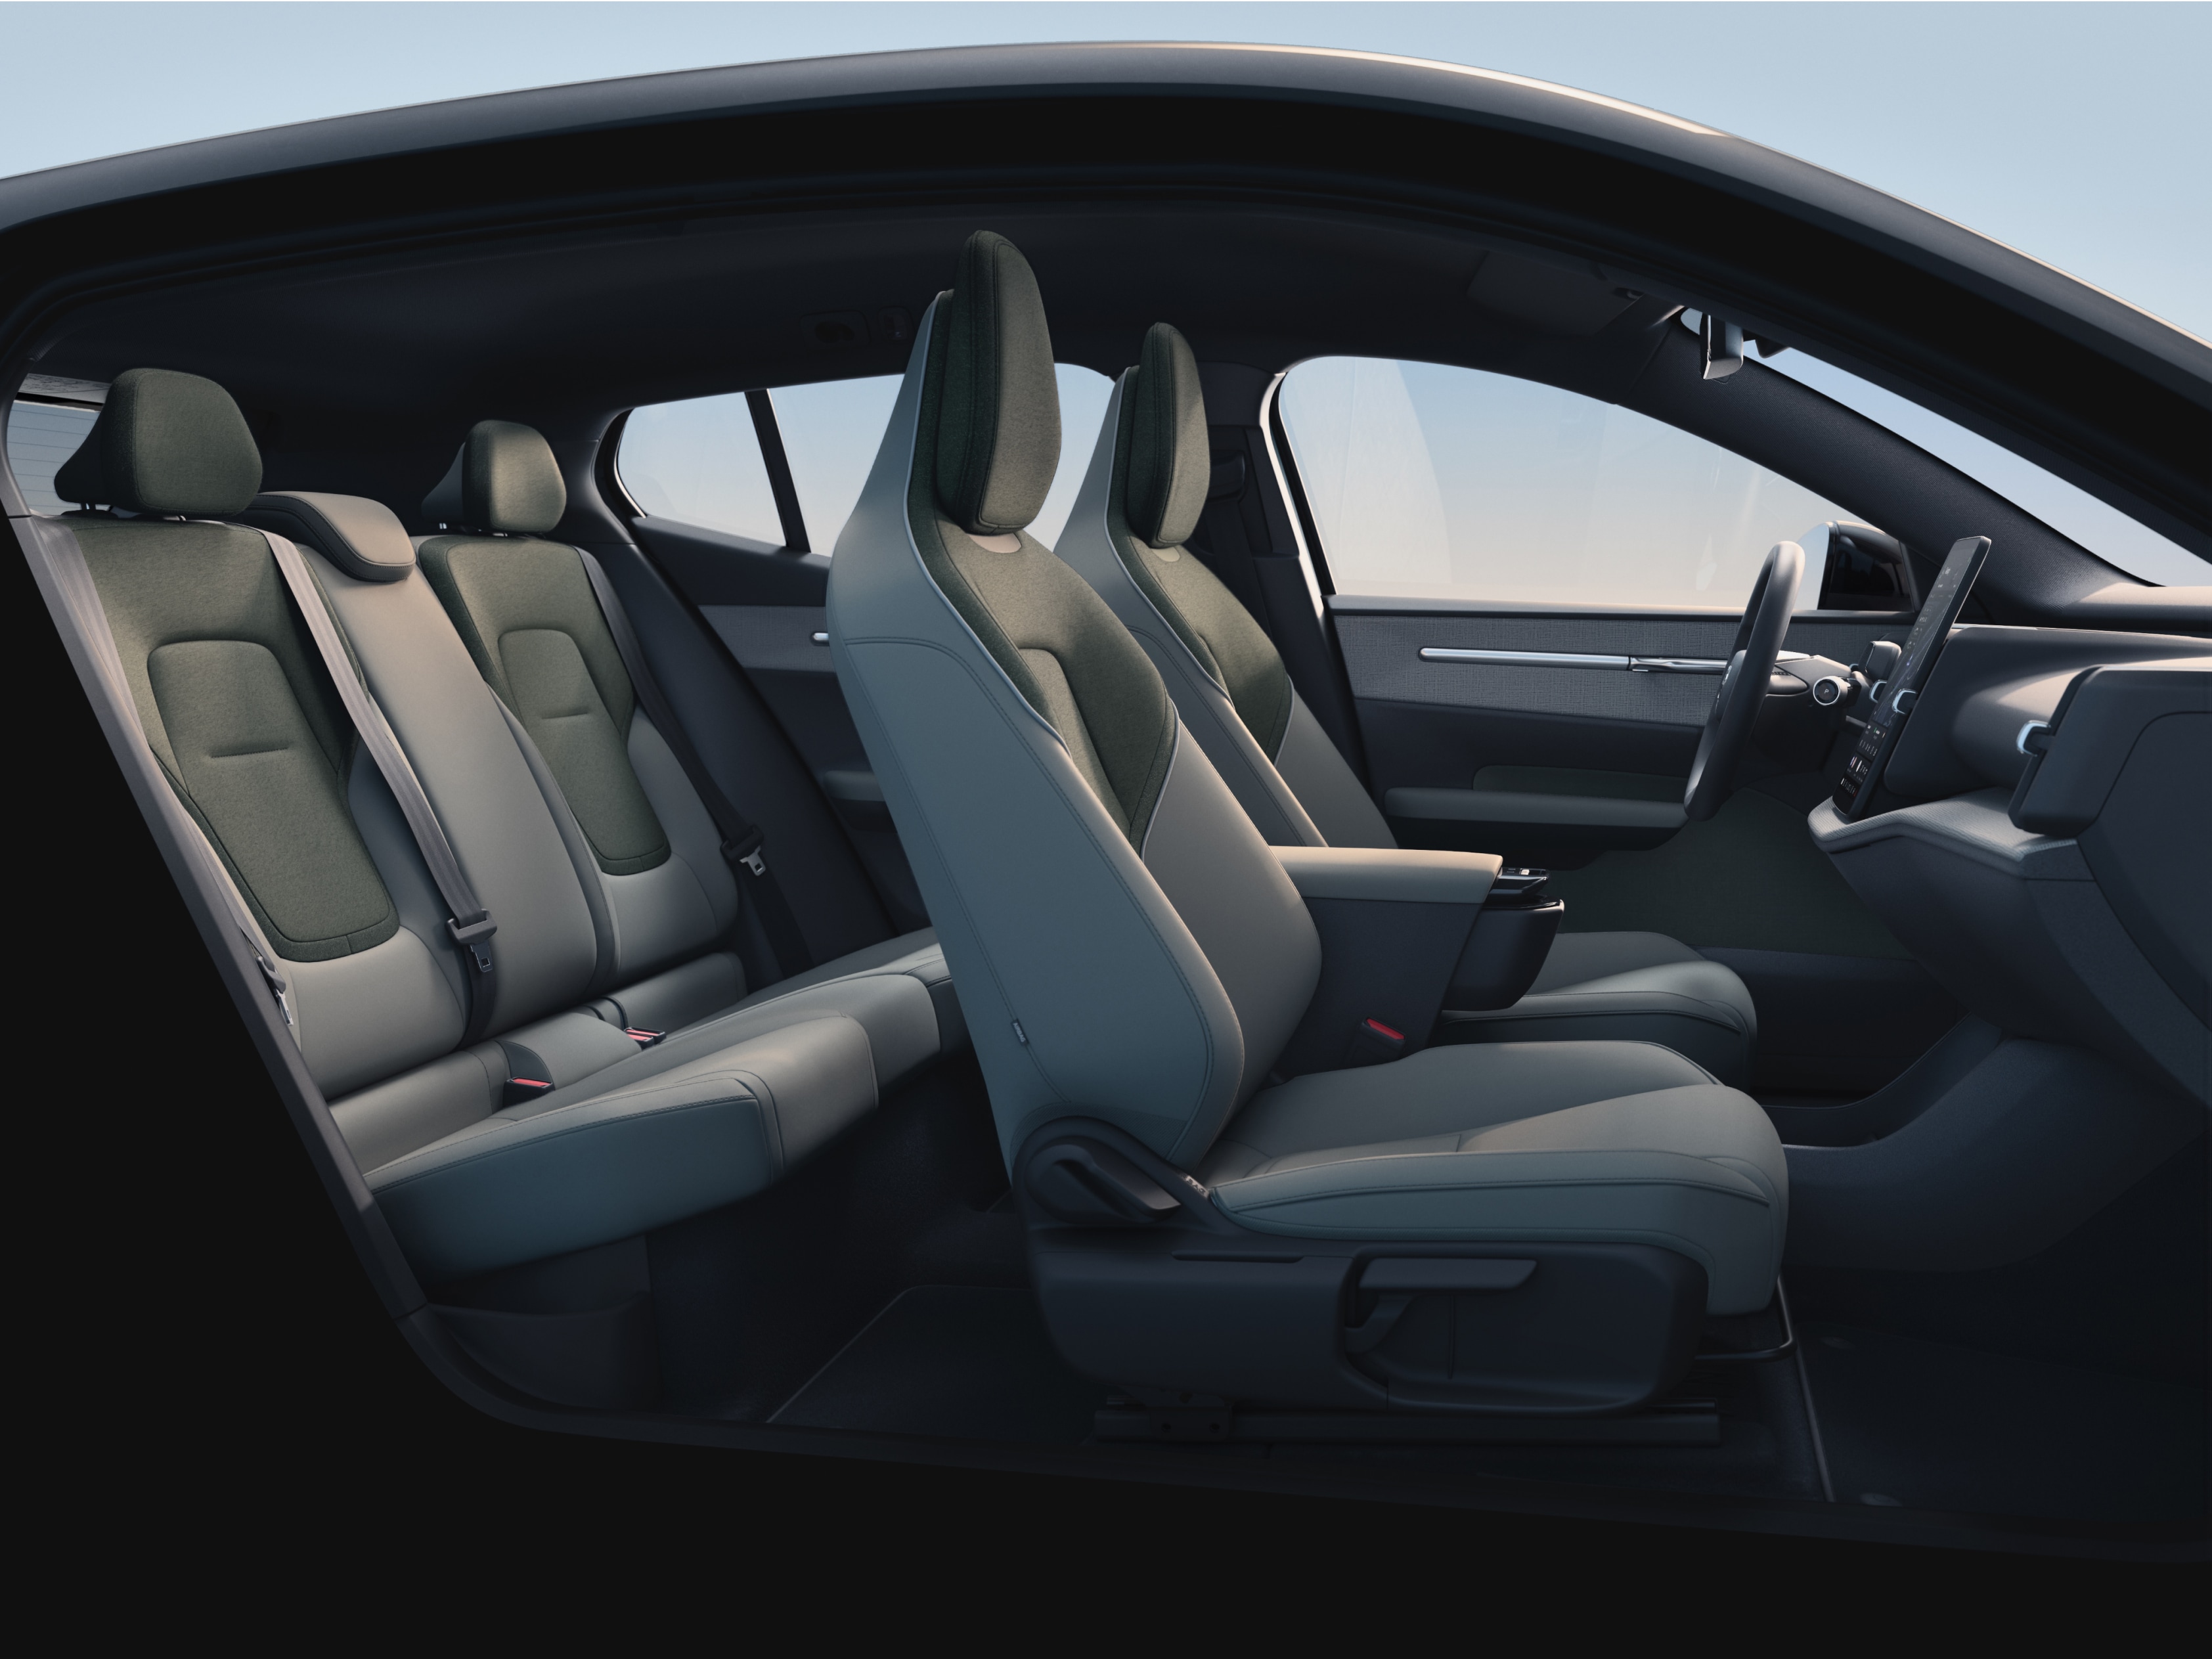 The 5-seat cabin of the Volvo EX30 in an interior design theme called Pine.